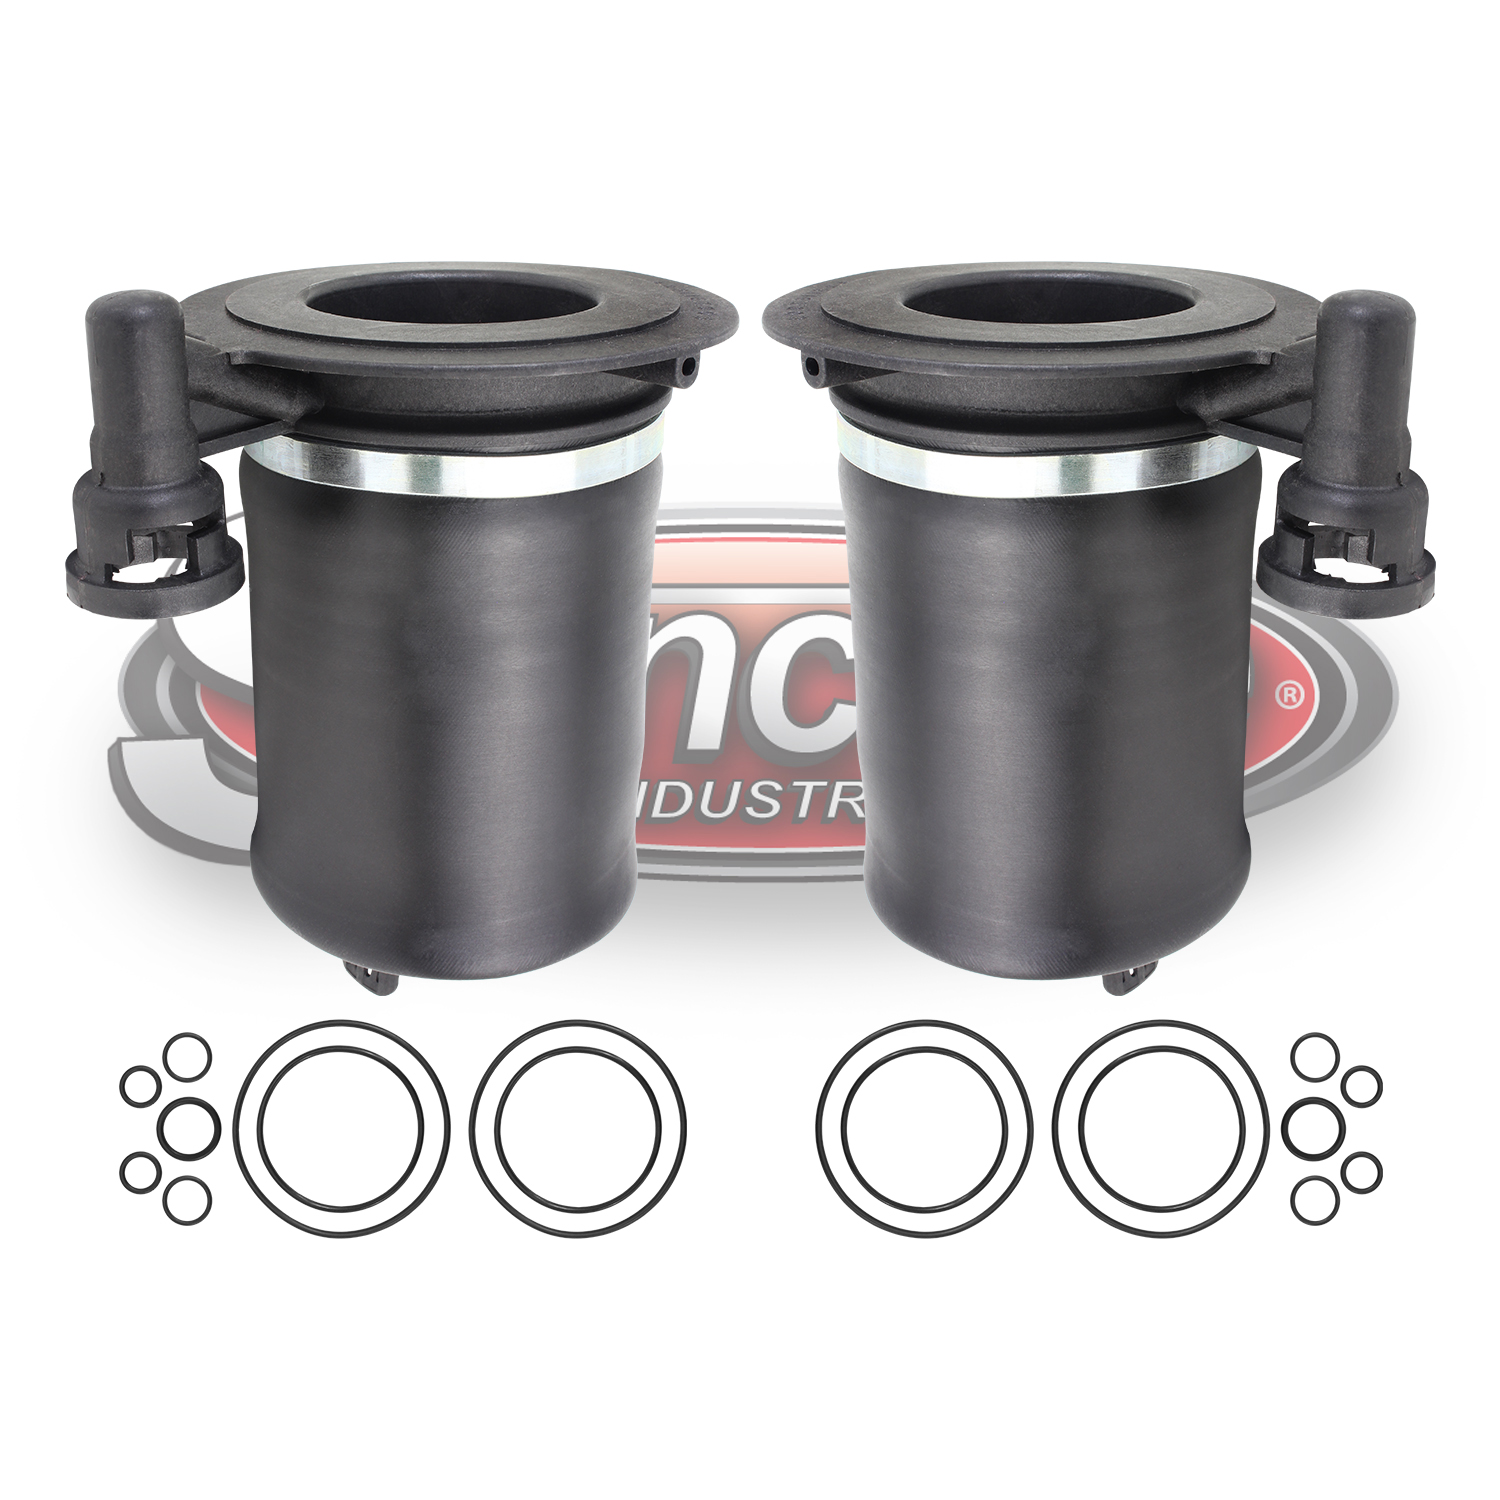 Rear Pair Suspension Air Springs & Seal Replacement - 2007-2012 Navigator & Expedition